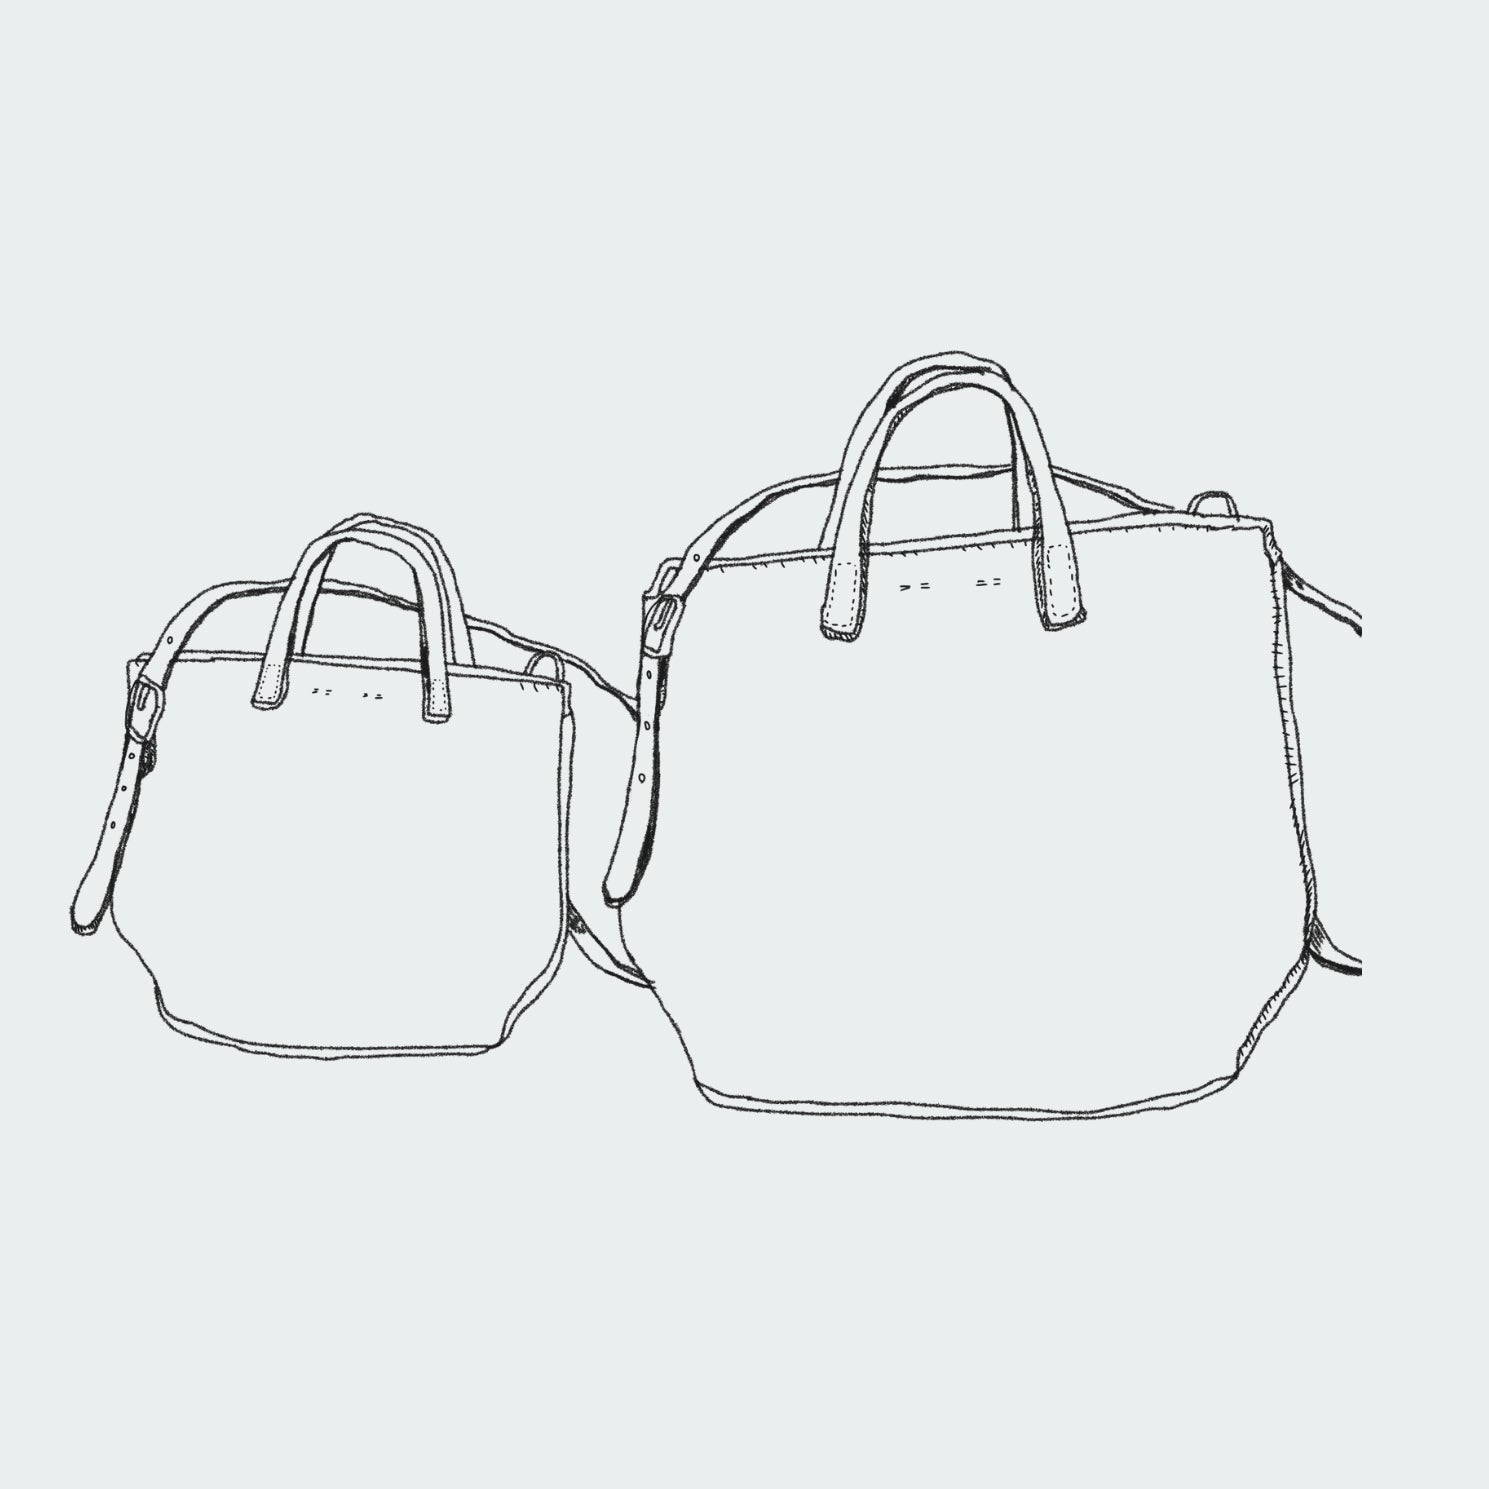 affordance_leather_bags